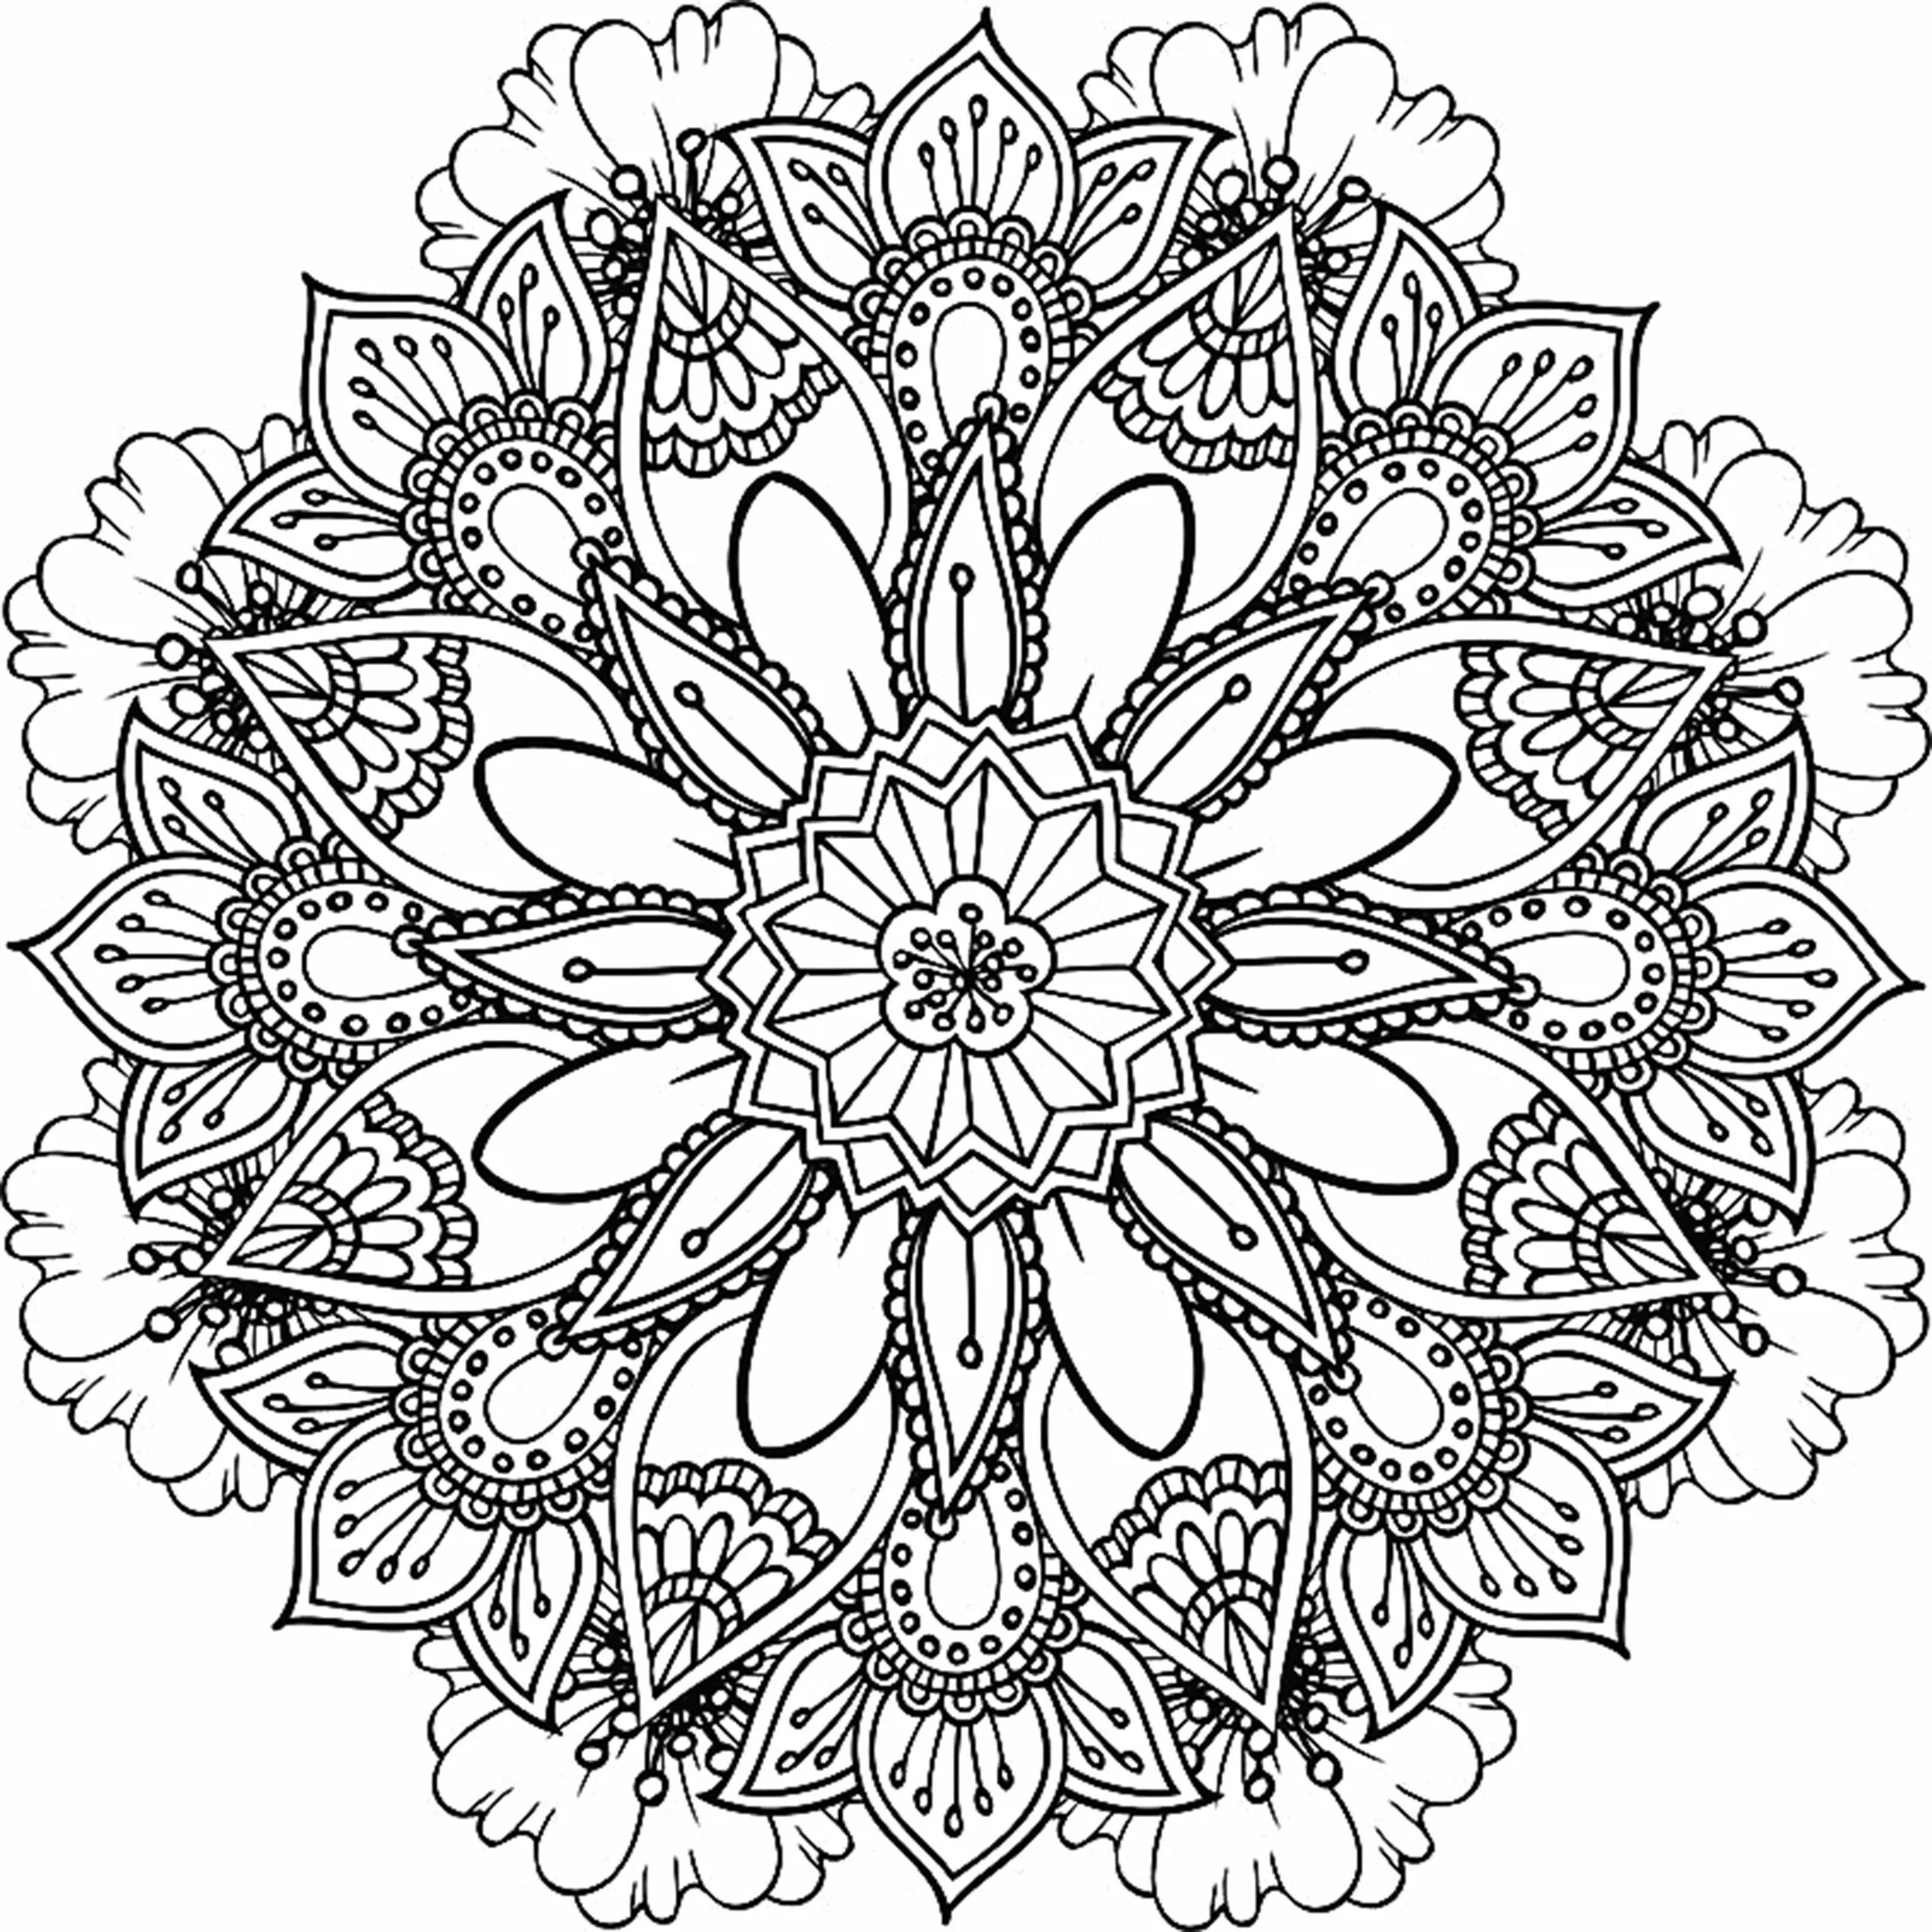 Exalted coloring page adult mandala